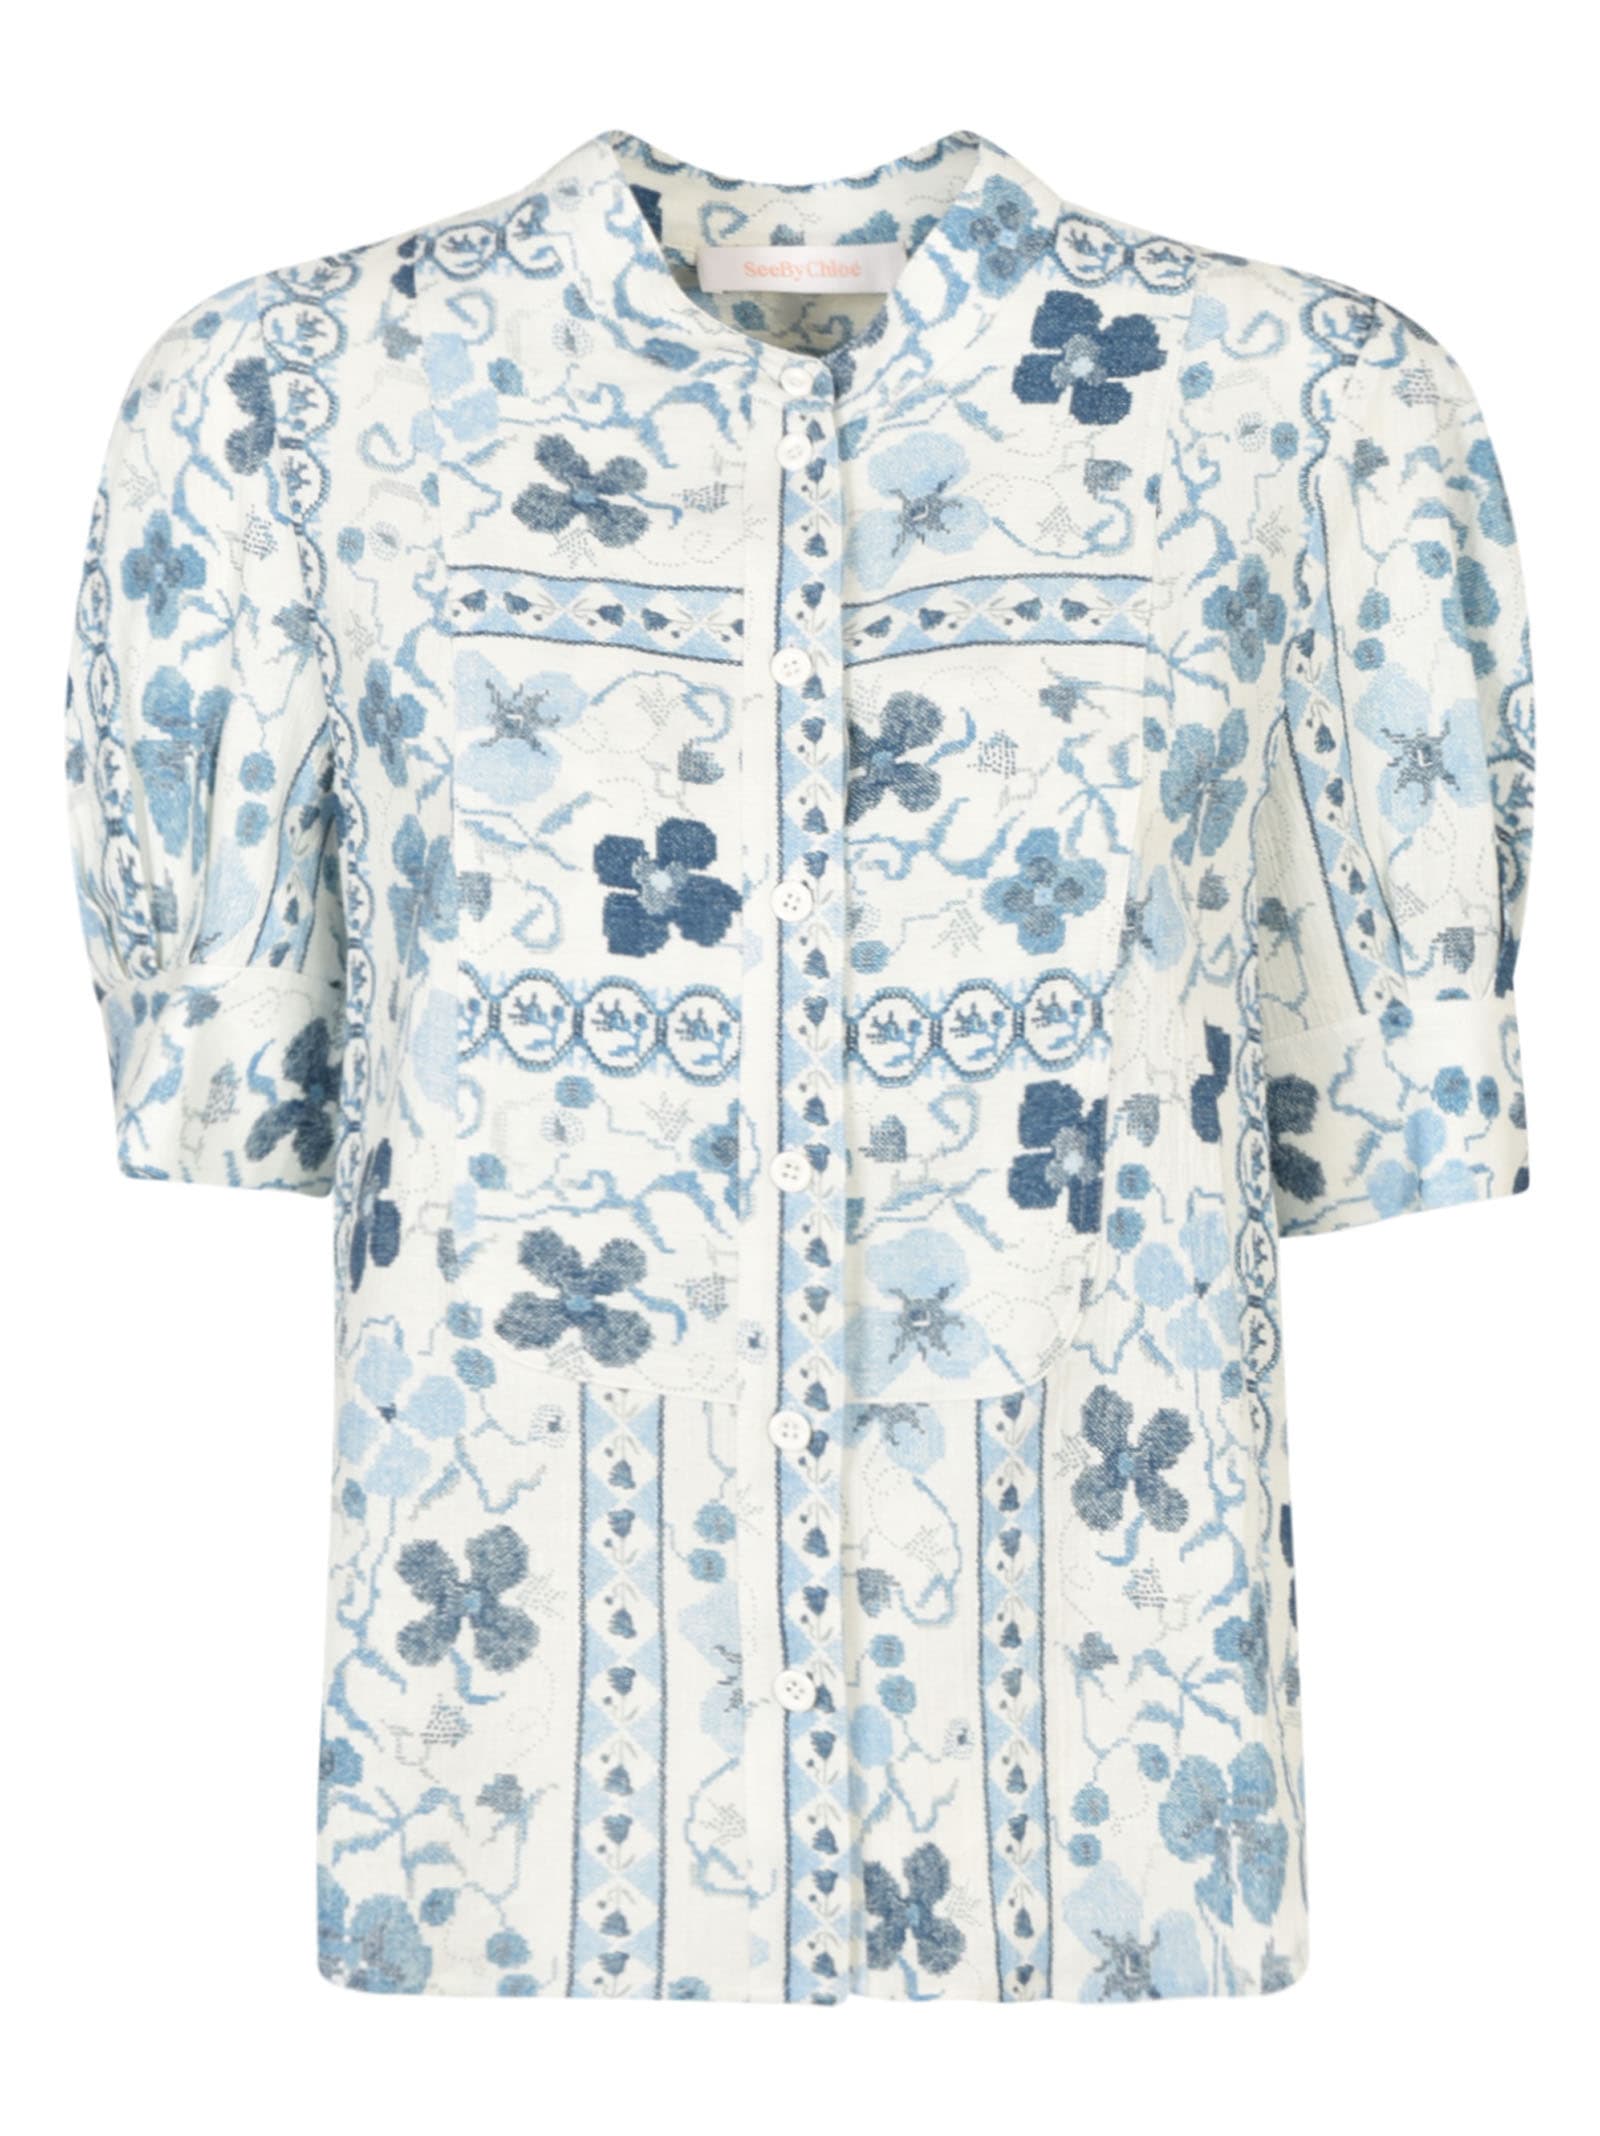 SEE BY CHLOÉ ROUND HEM FLORAL TOP